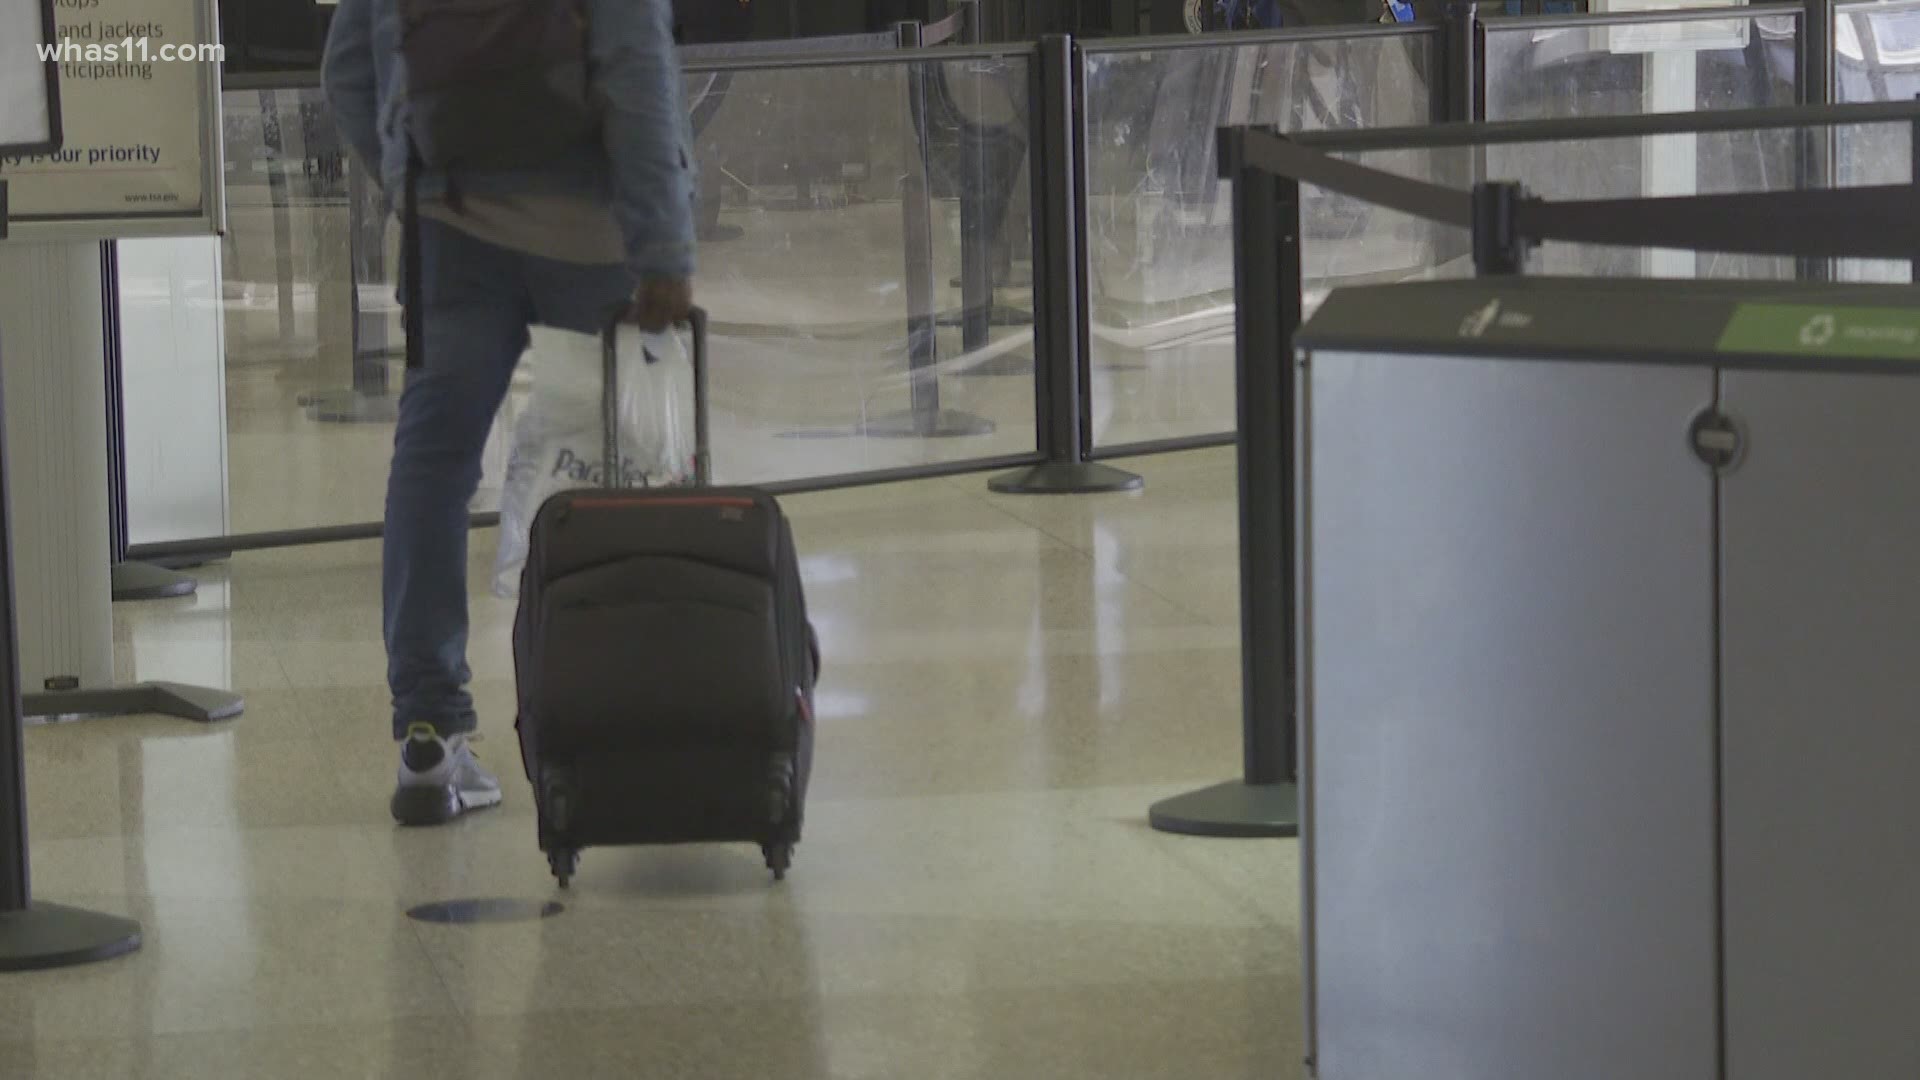 Staff at Louisville's airport and airlines have been preparing for months for holiday travelers.